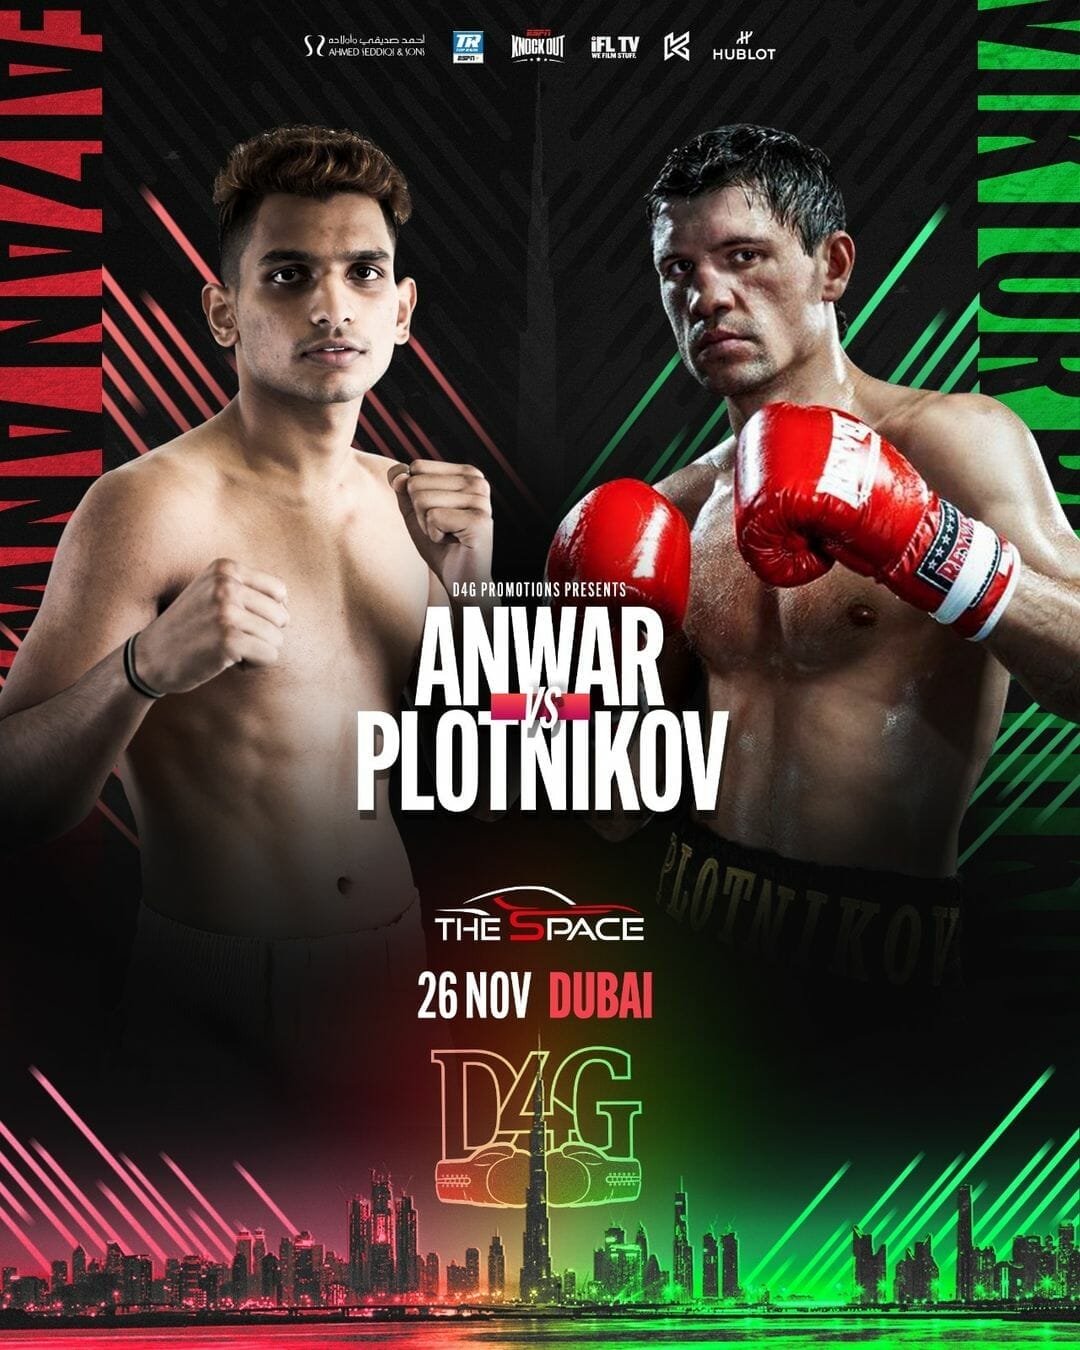 Anwar Plotnikov competing in Round 10 of a boxing match against Anwar Plotnikov.